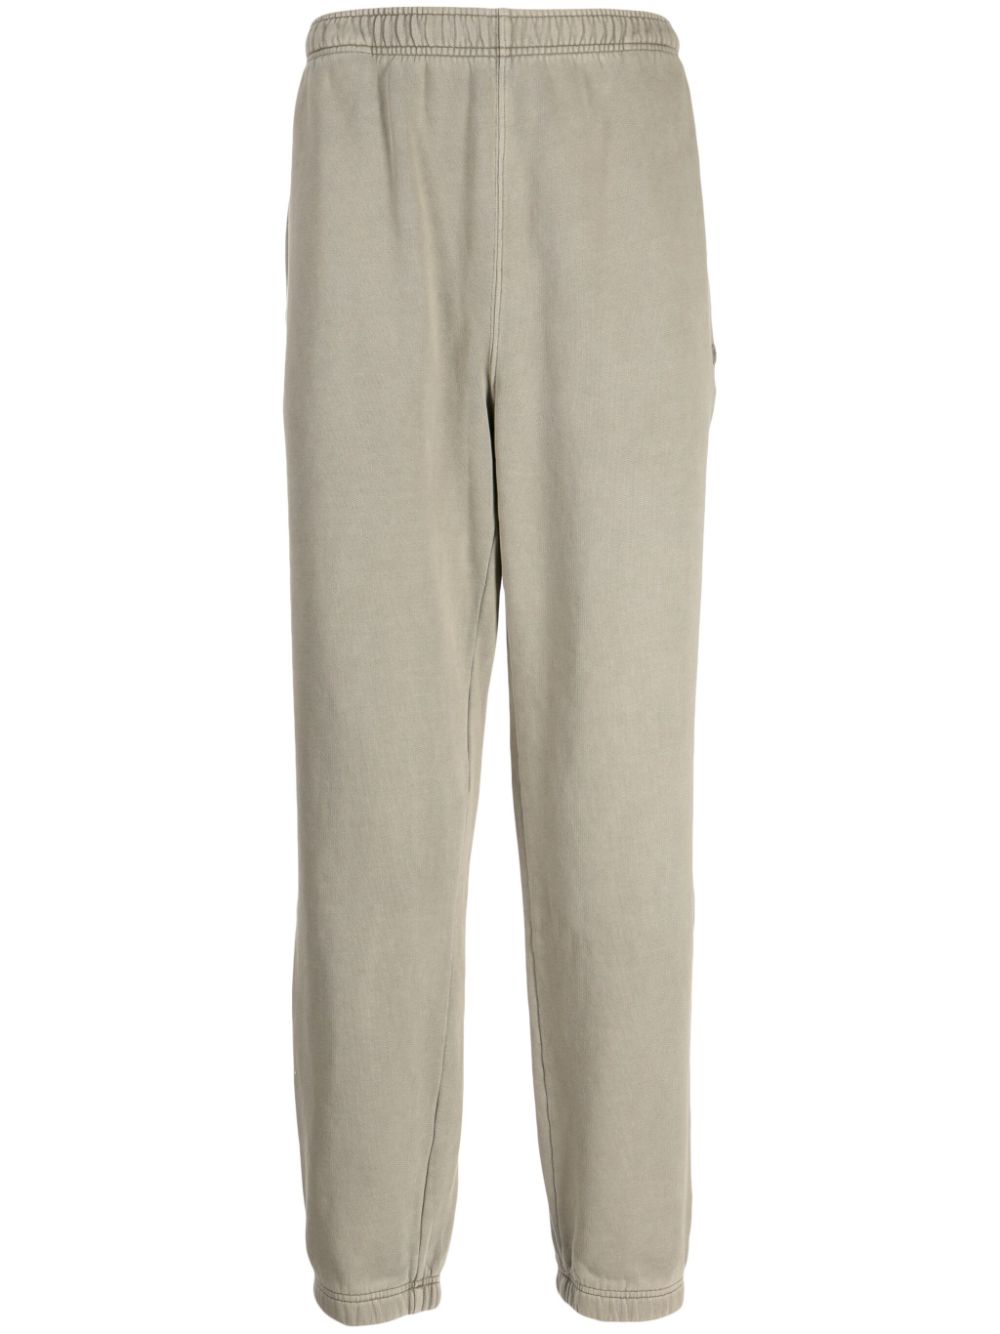 Lacoste tapered cotton track pants - Marrone